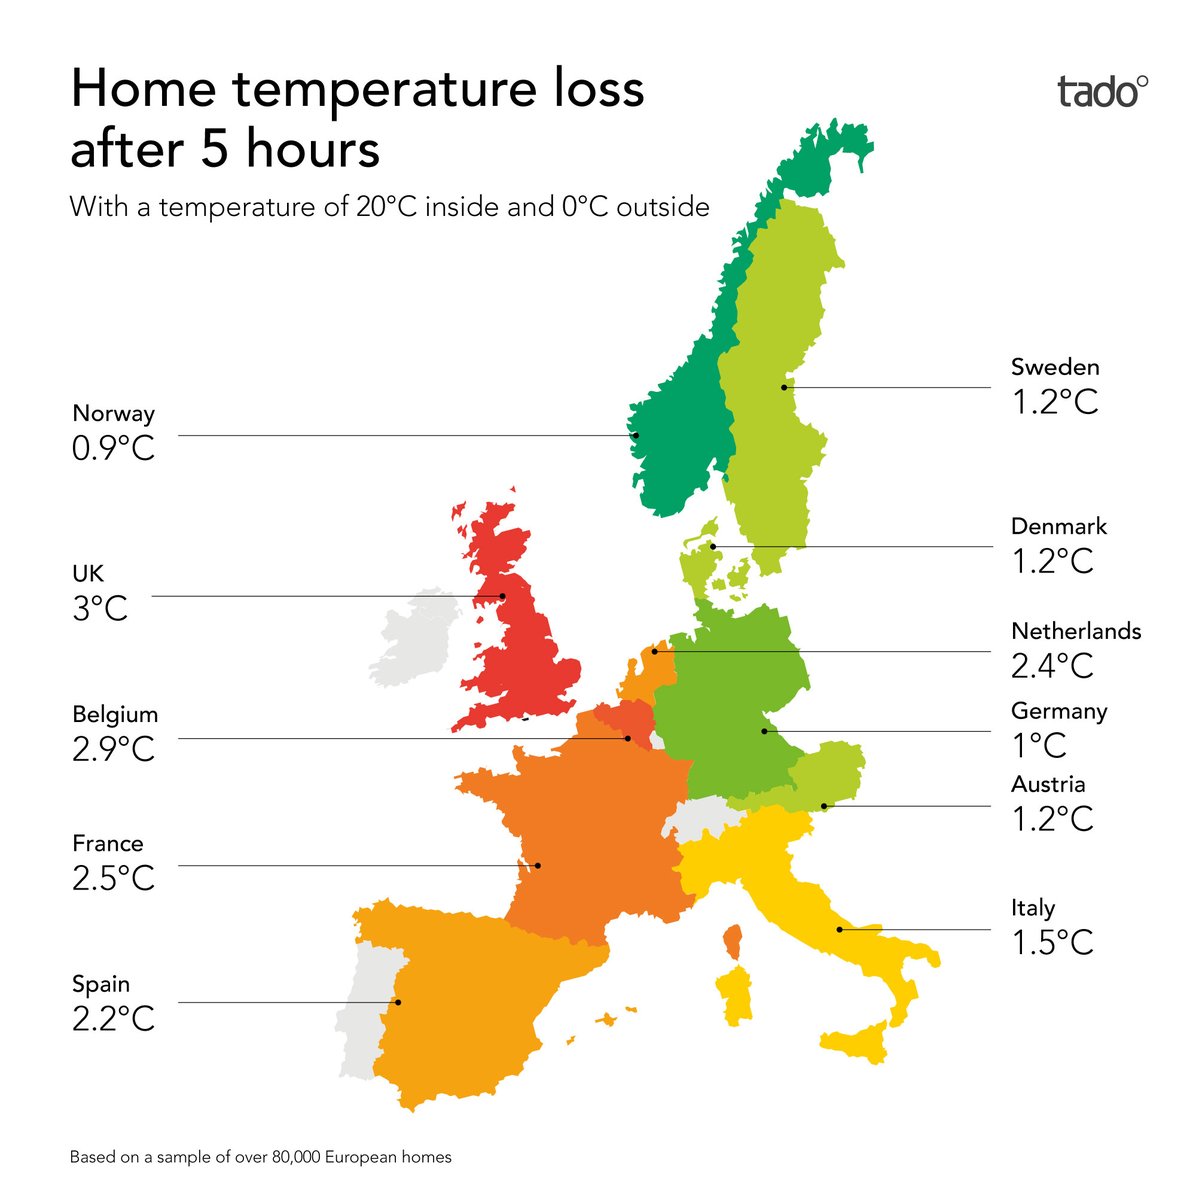 Home temperature loss after 5 hours map